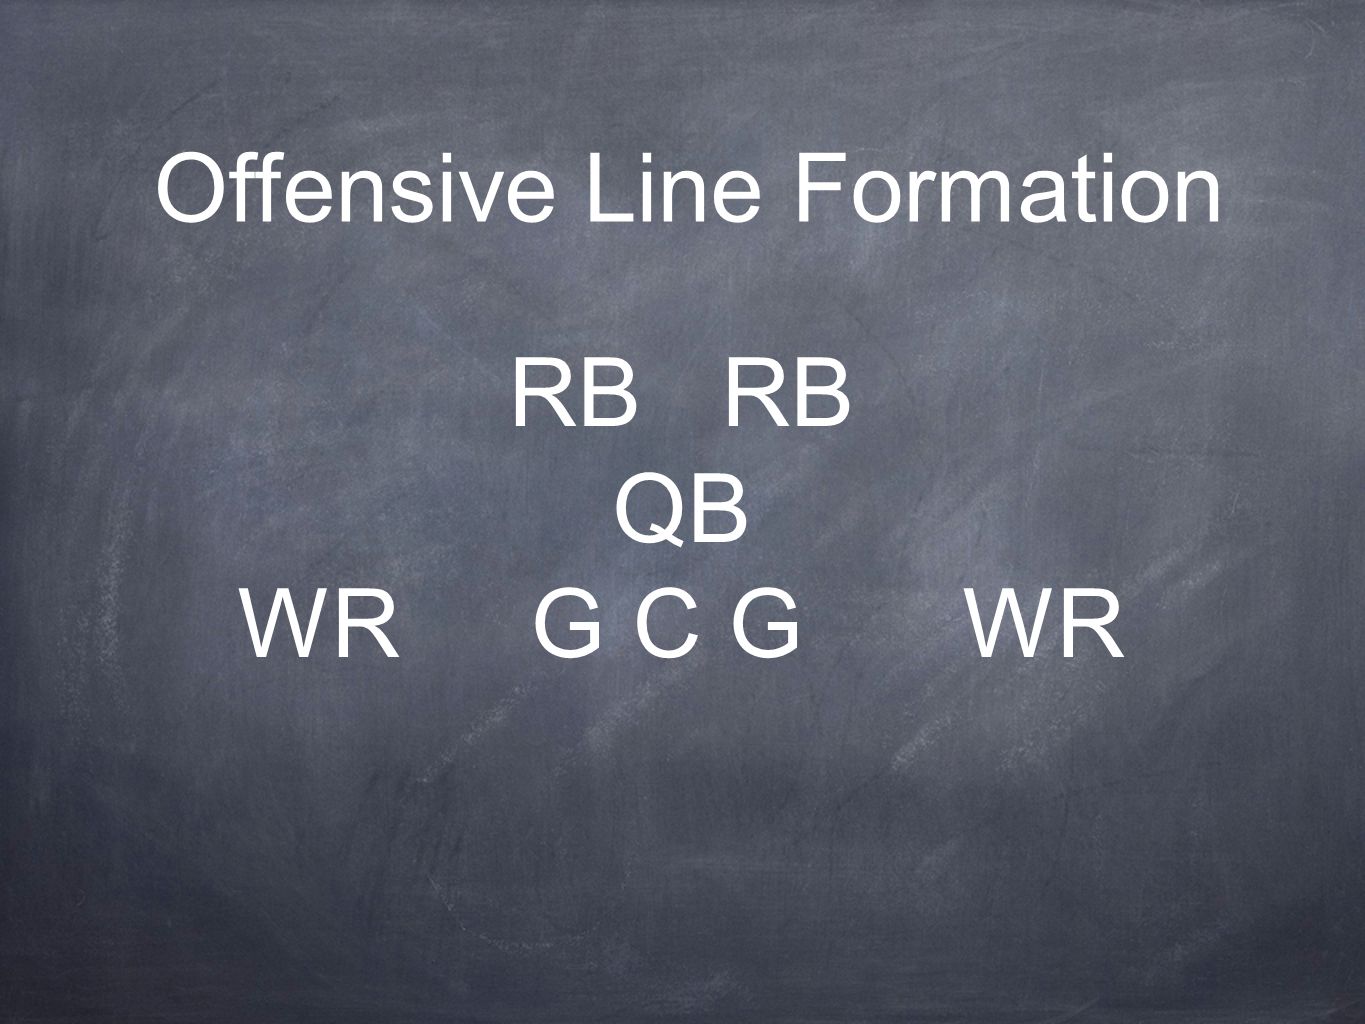 Offensive Line Formation